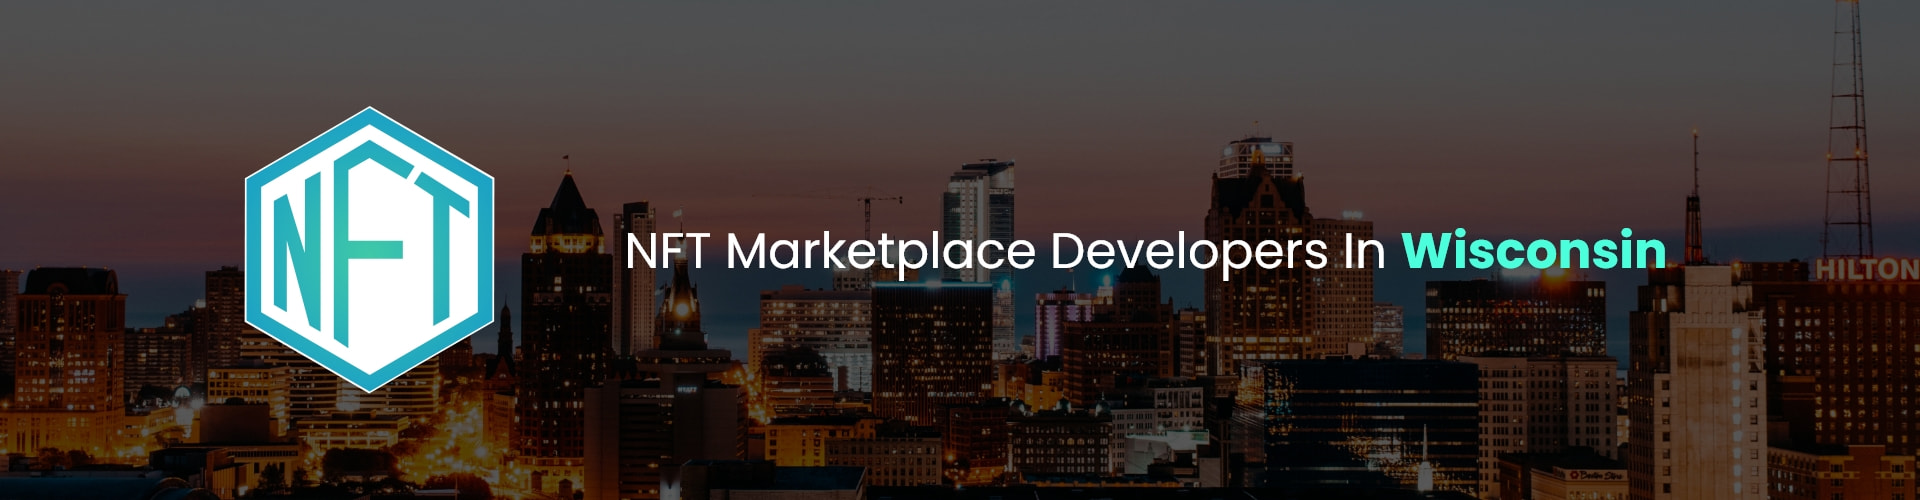 hire nft marketplace developers in wisconsin